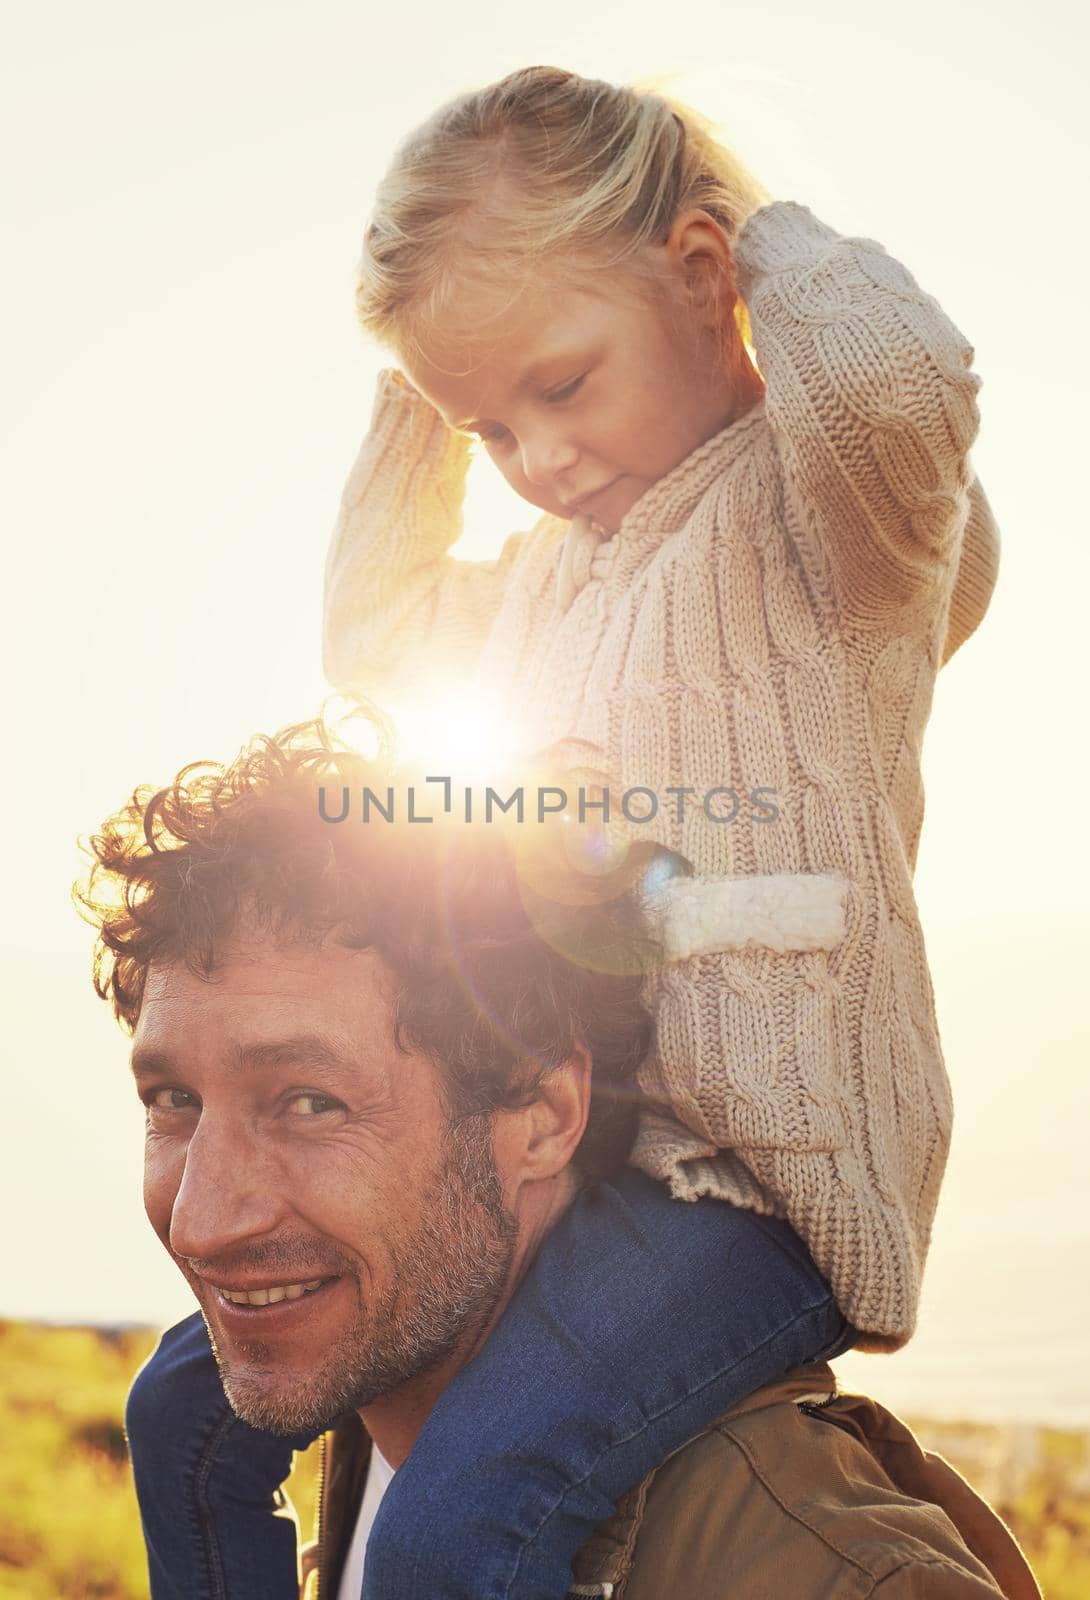 Shot of a father carrying his little girl on his shoulders while walking outdoors